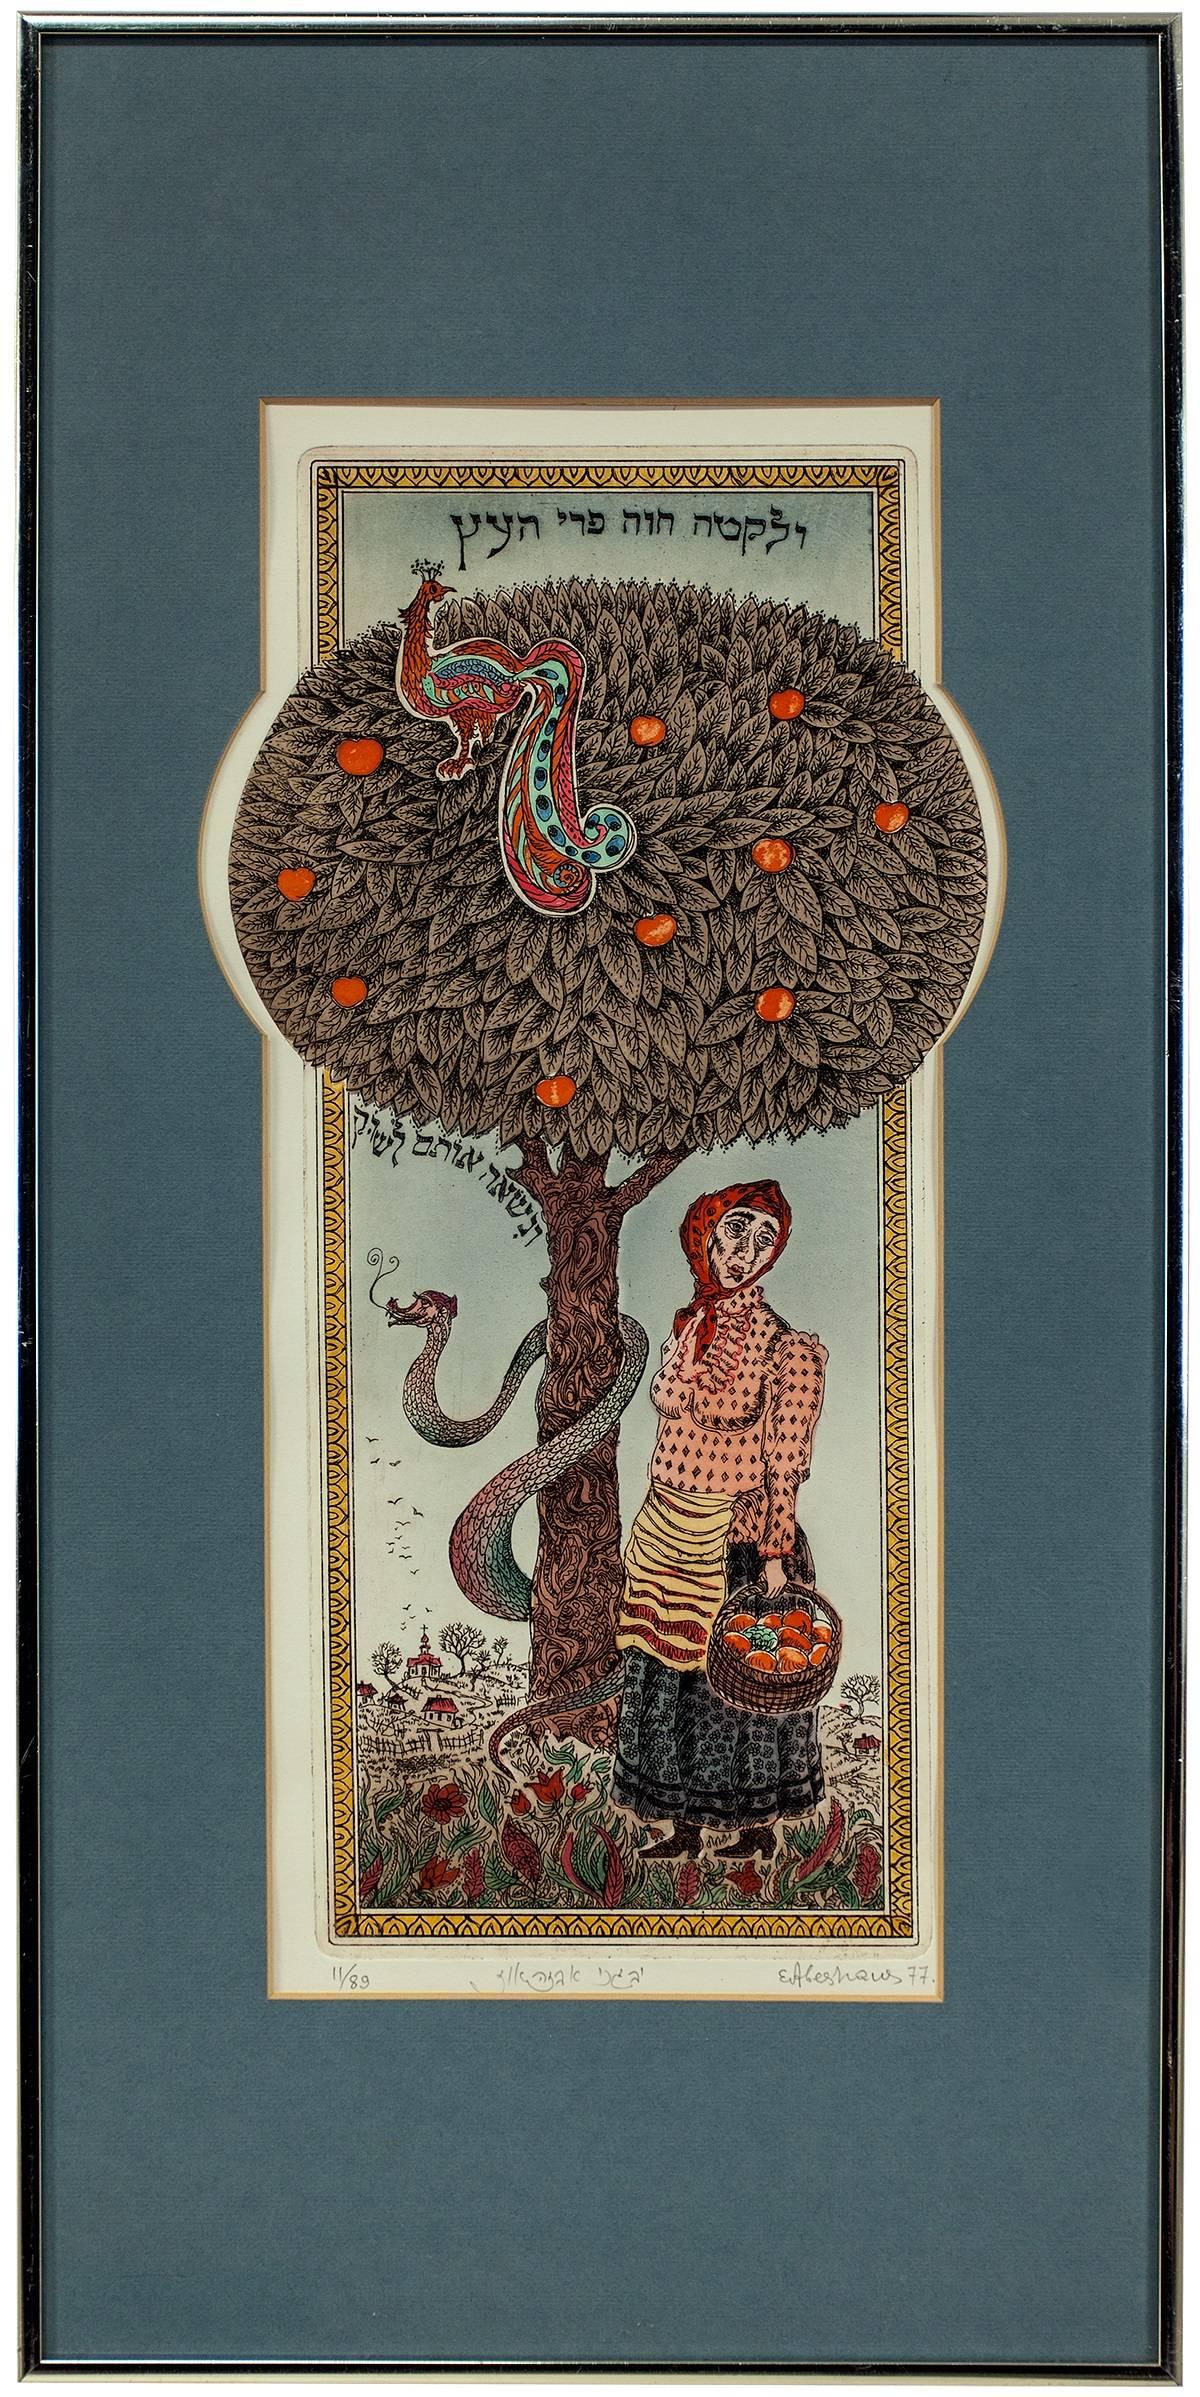 Eugene Abeshaus Figurative Print - Eve and the Snake in the Garden of Eden